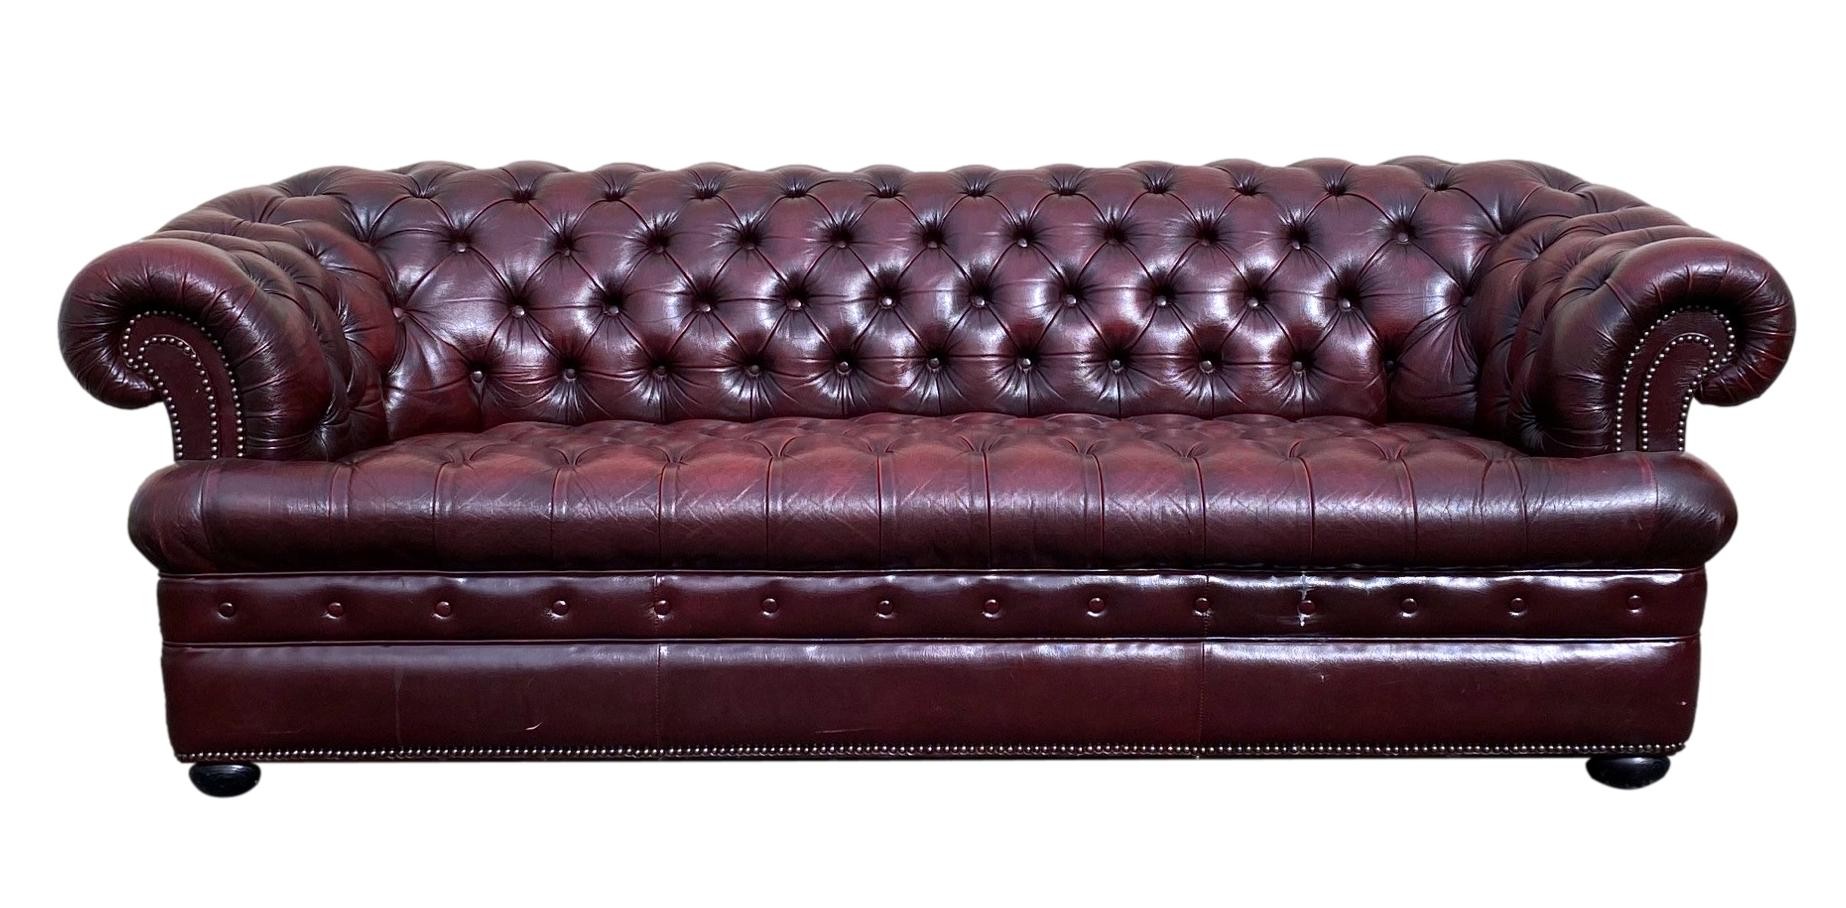 A modern leather Chesterfield sofa in deep red buttoned leather with studded scroll arms